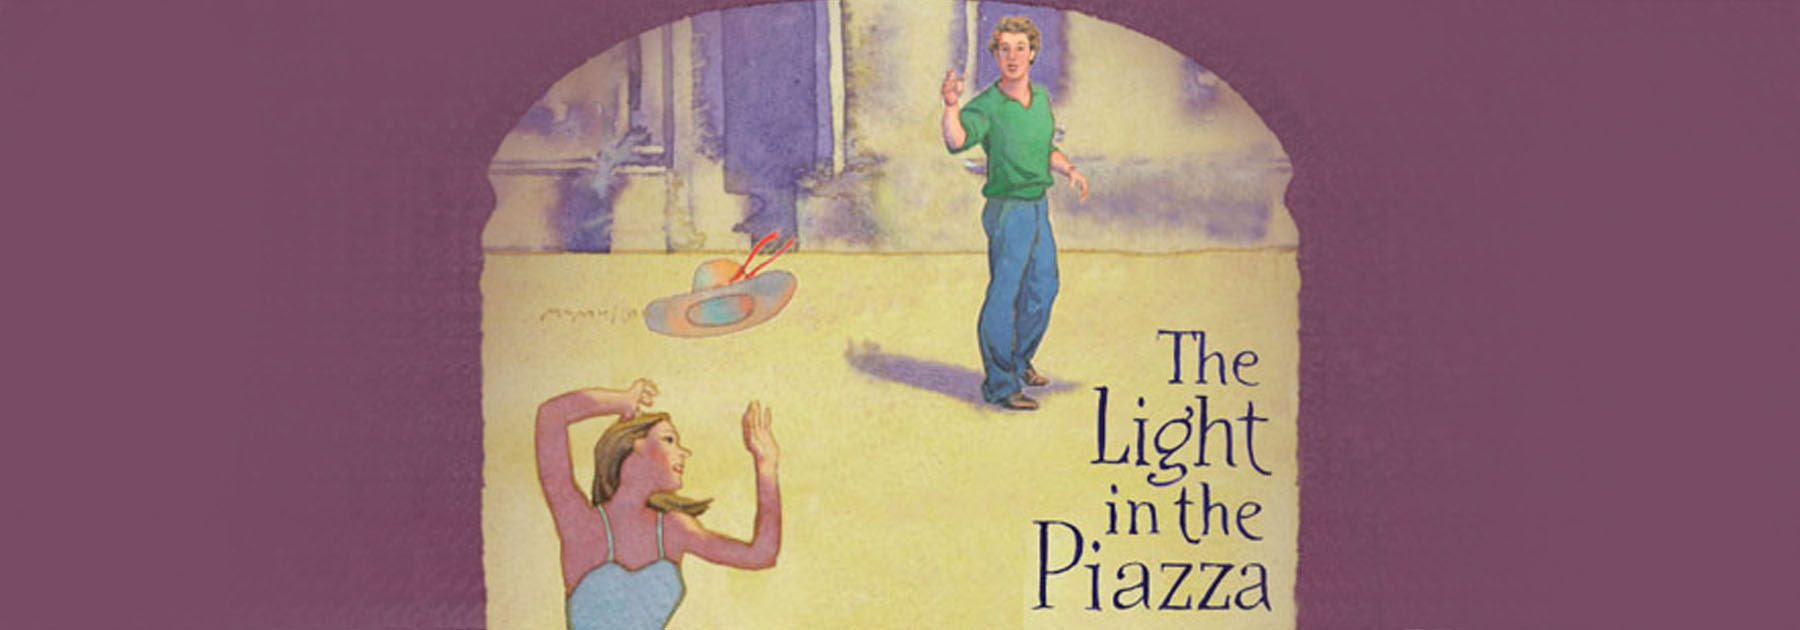 the light in the piazza poster art